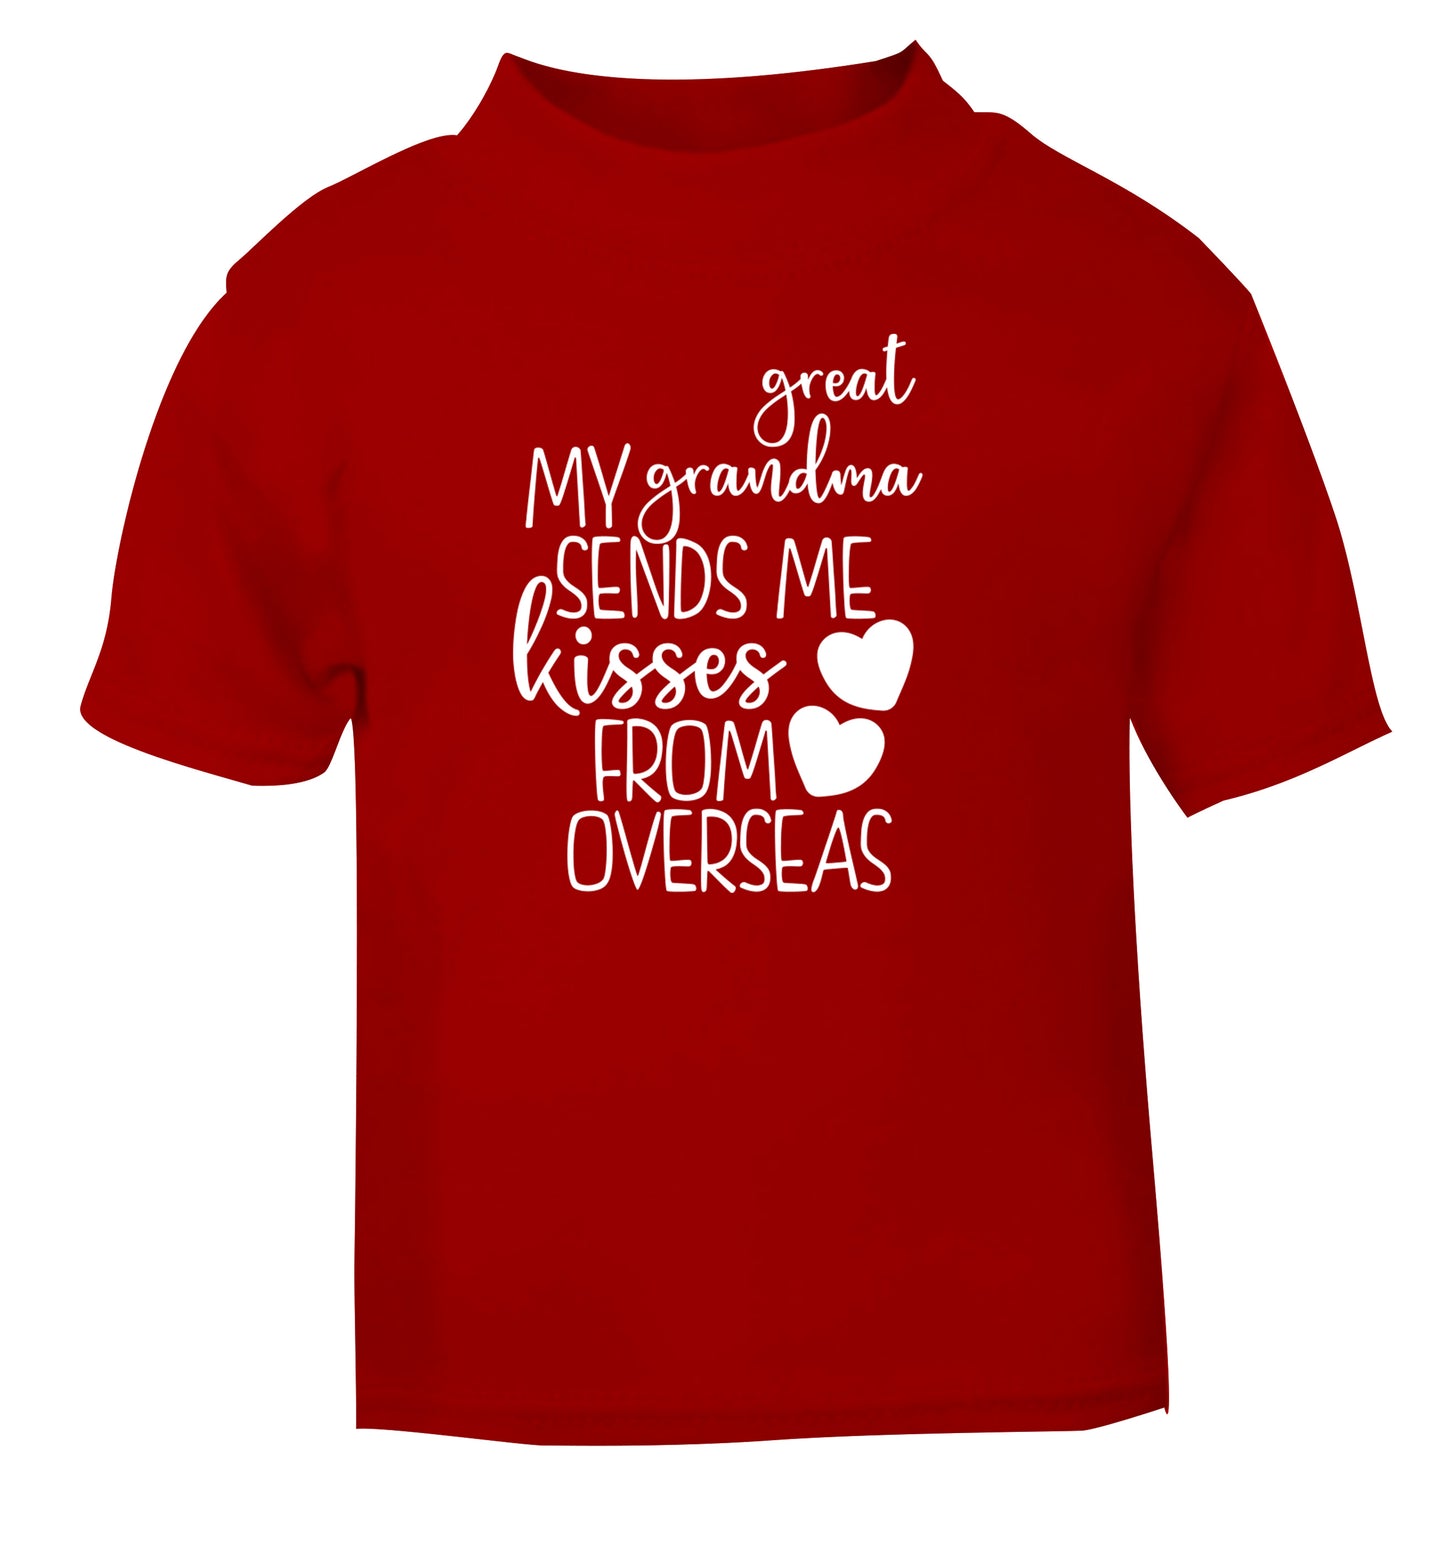 My great grandma sends me kisses from overseas red Baby Toddler Tshirt 2 Years